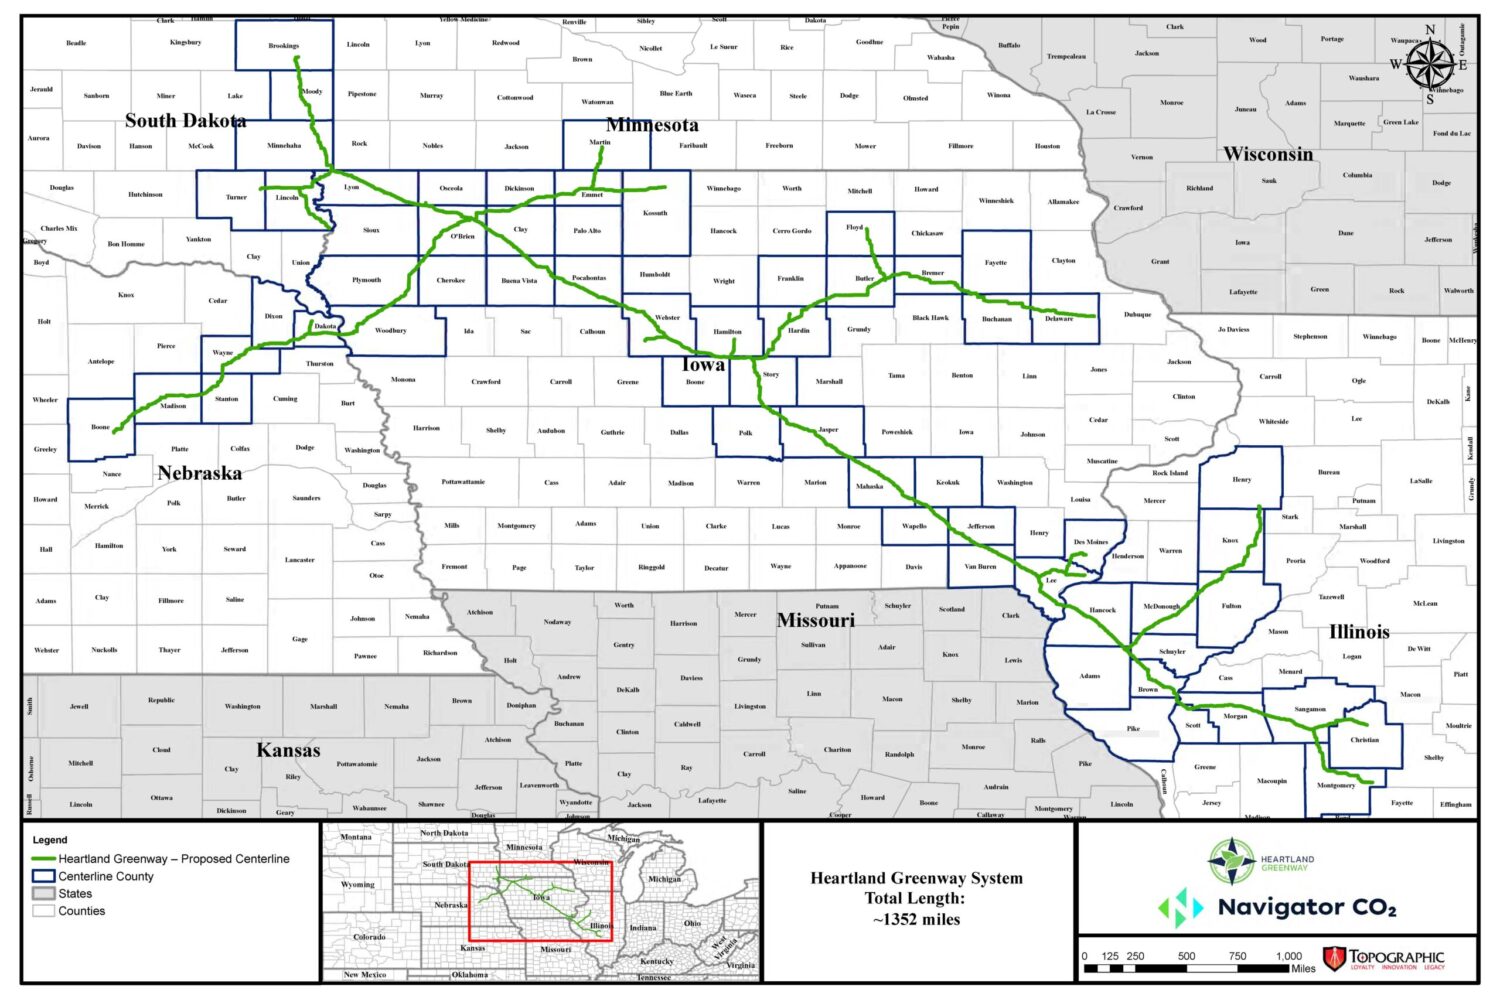 The proposed route of the Navigator CO2 carbon sequestration pipeline. Courtesy of Navigator CO2